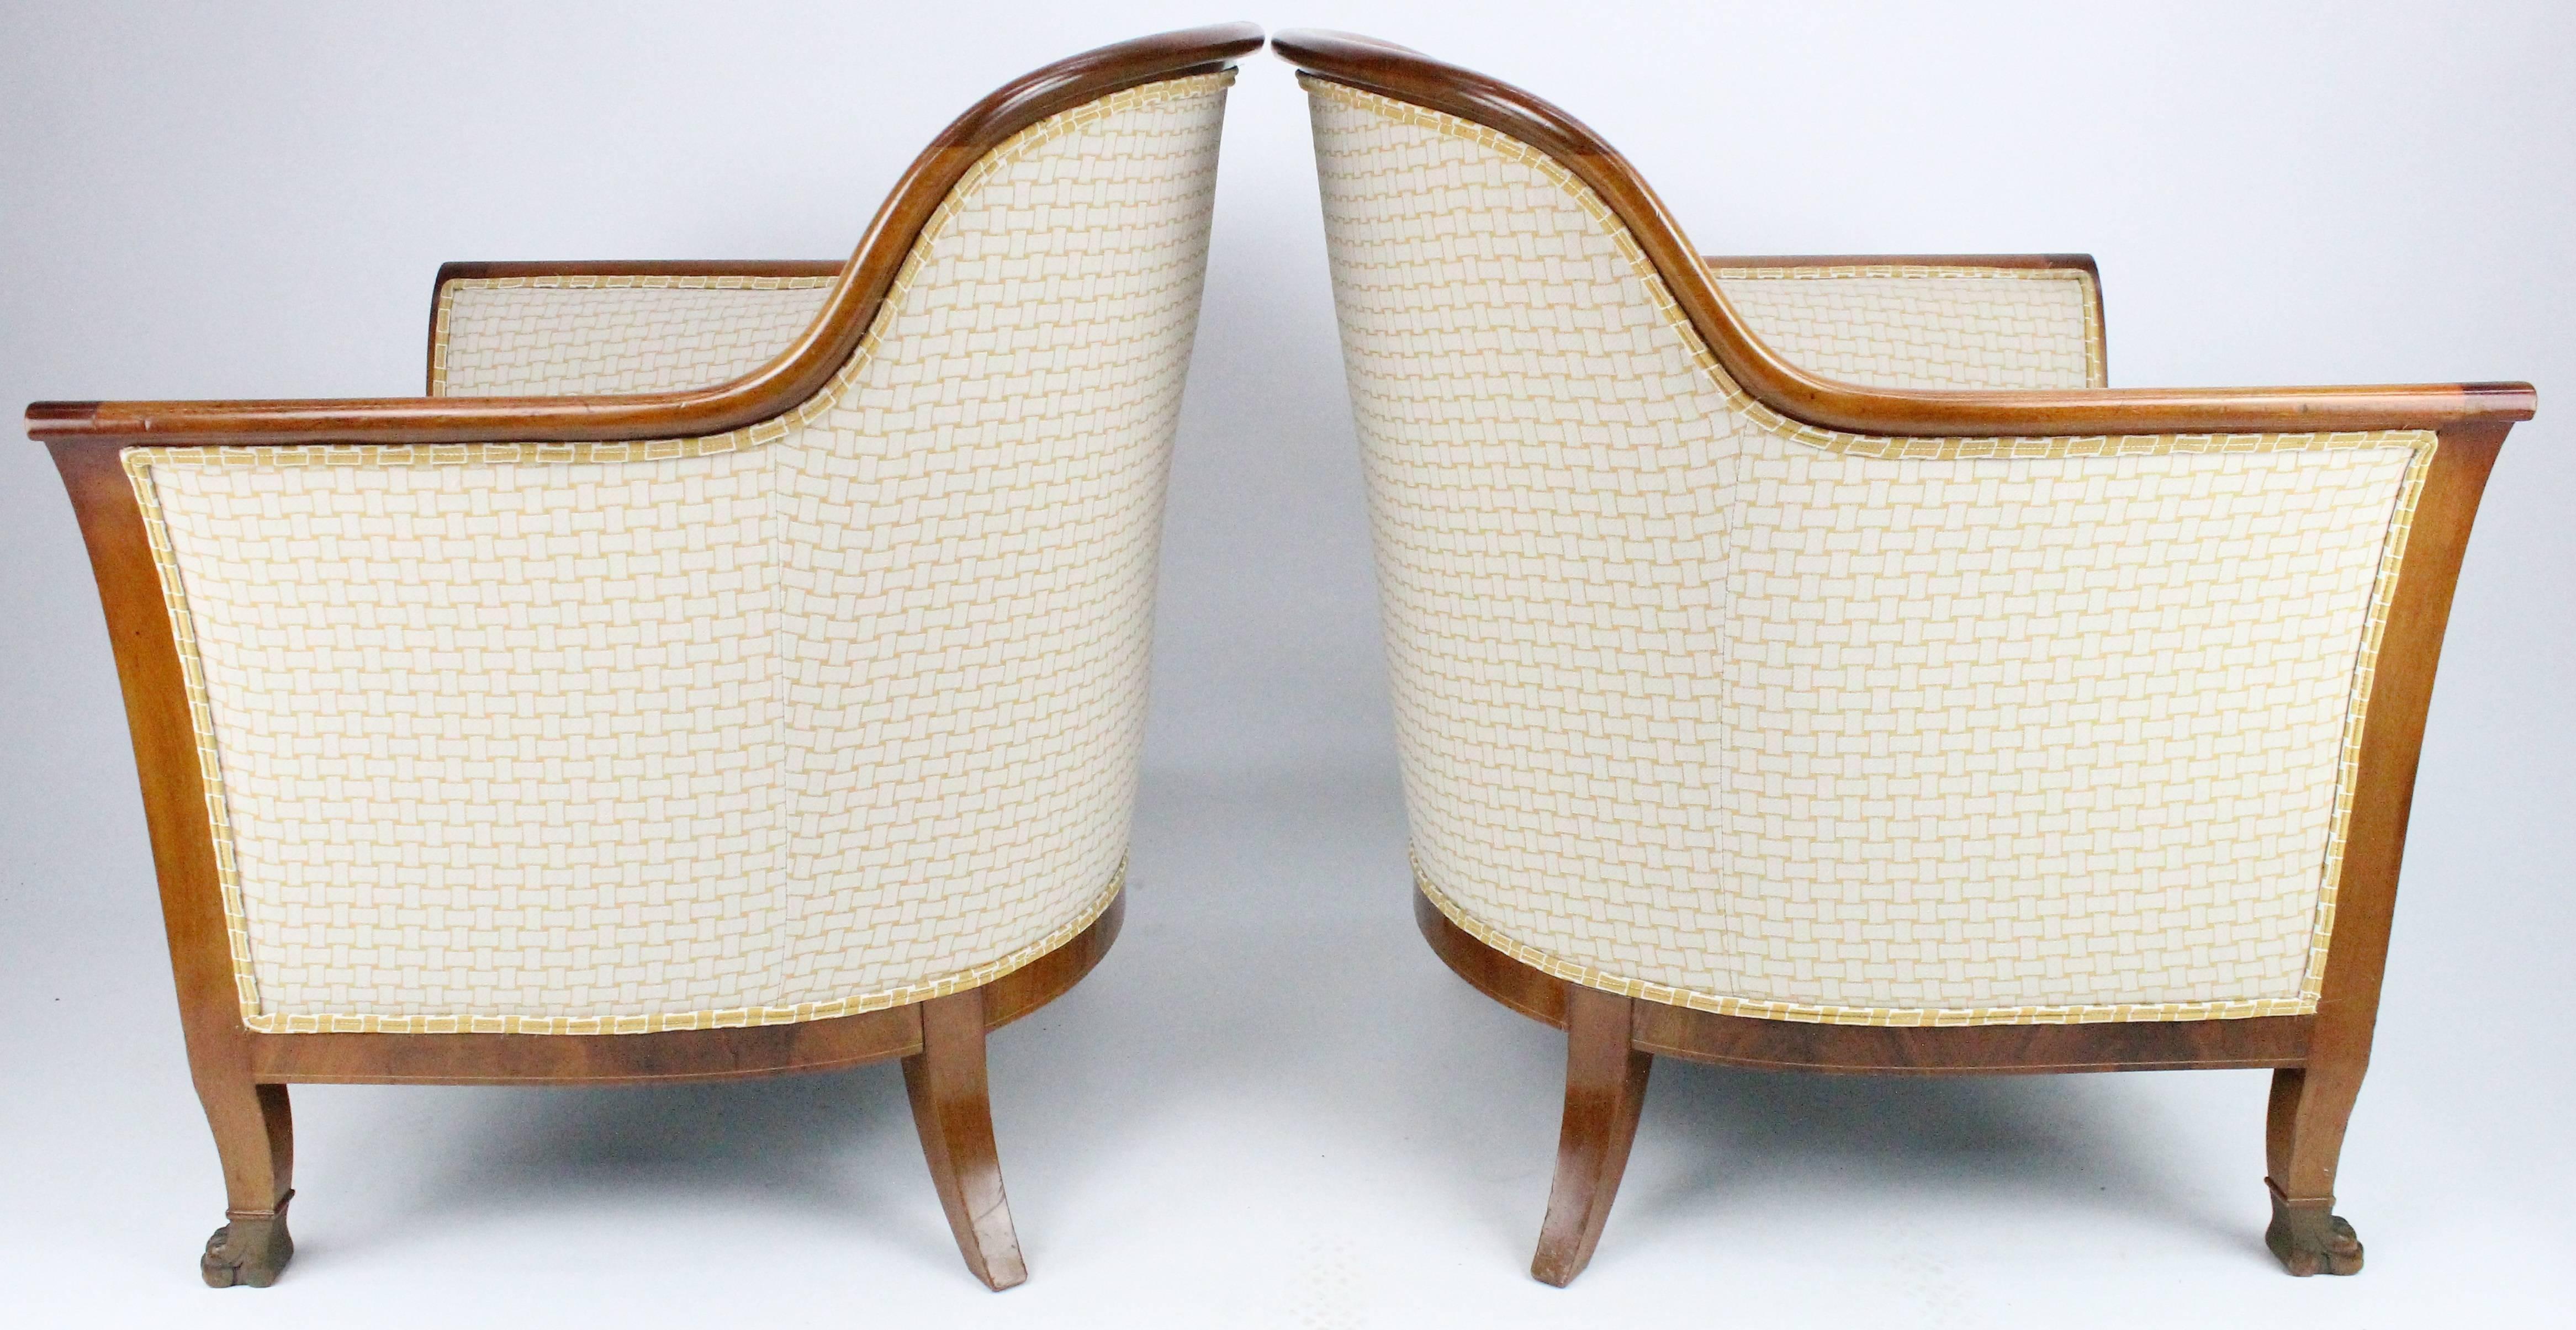 A nice pair of Swedish bergere chairs in mahogany. Recently upholstered. Very nice original condition. Minor marks and scratches. Excellent quality with very nice details.

A pair of matching stools is sold separately here at 1stDibs by us. See